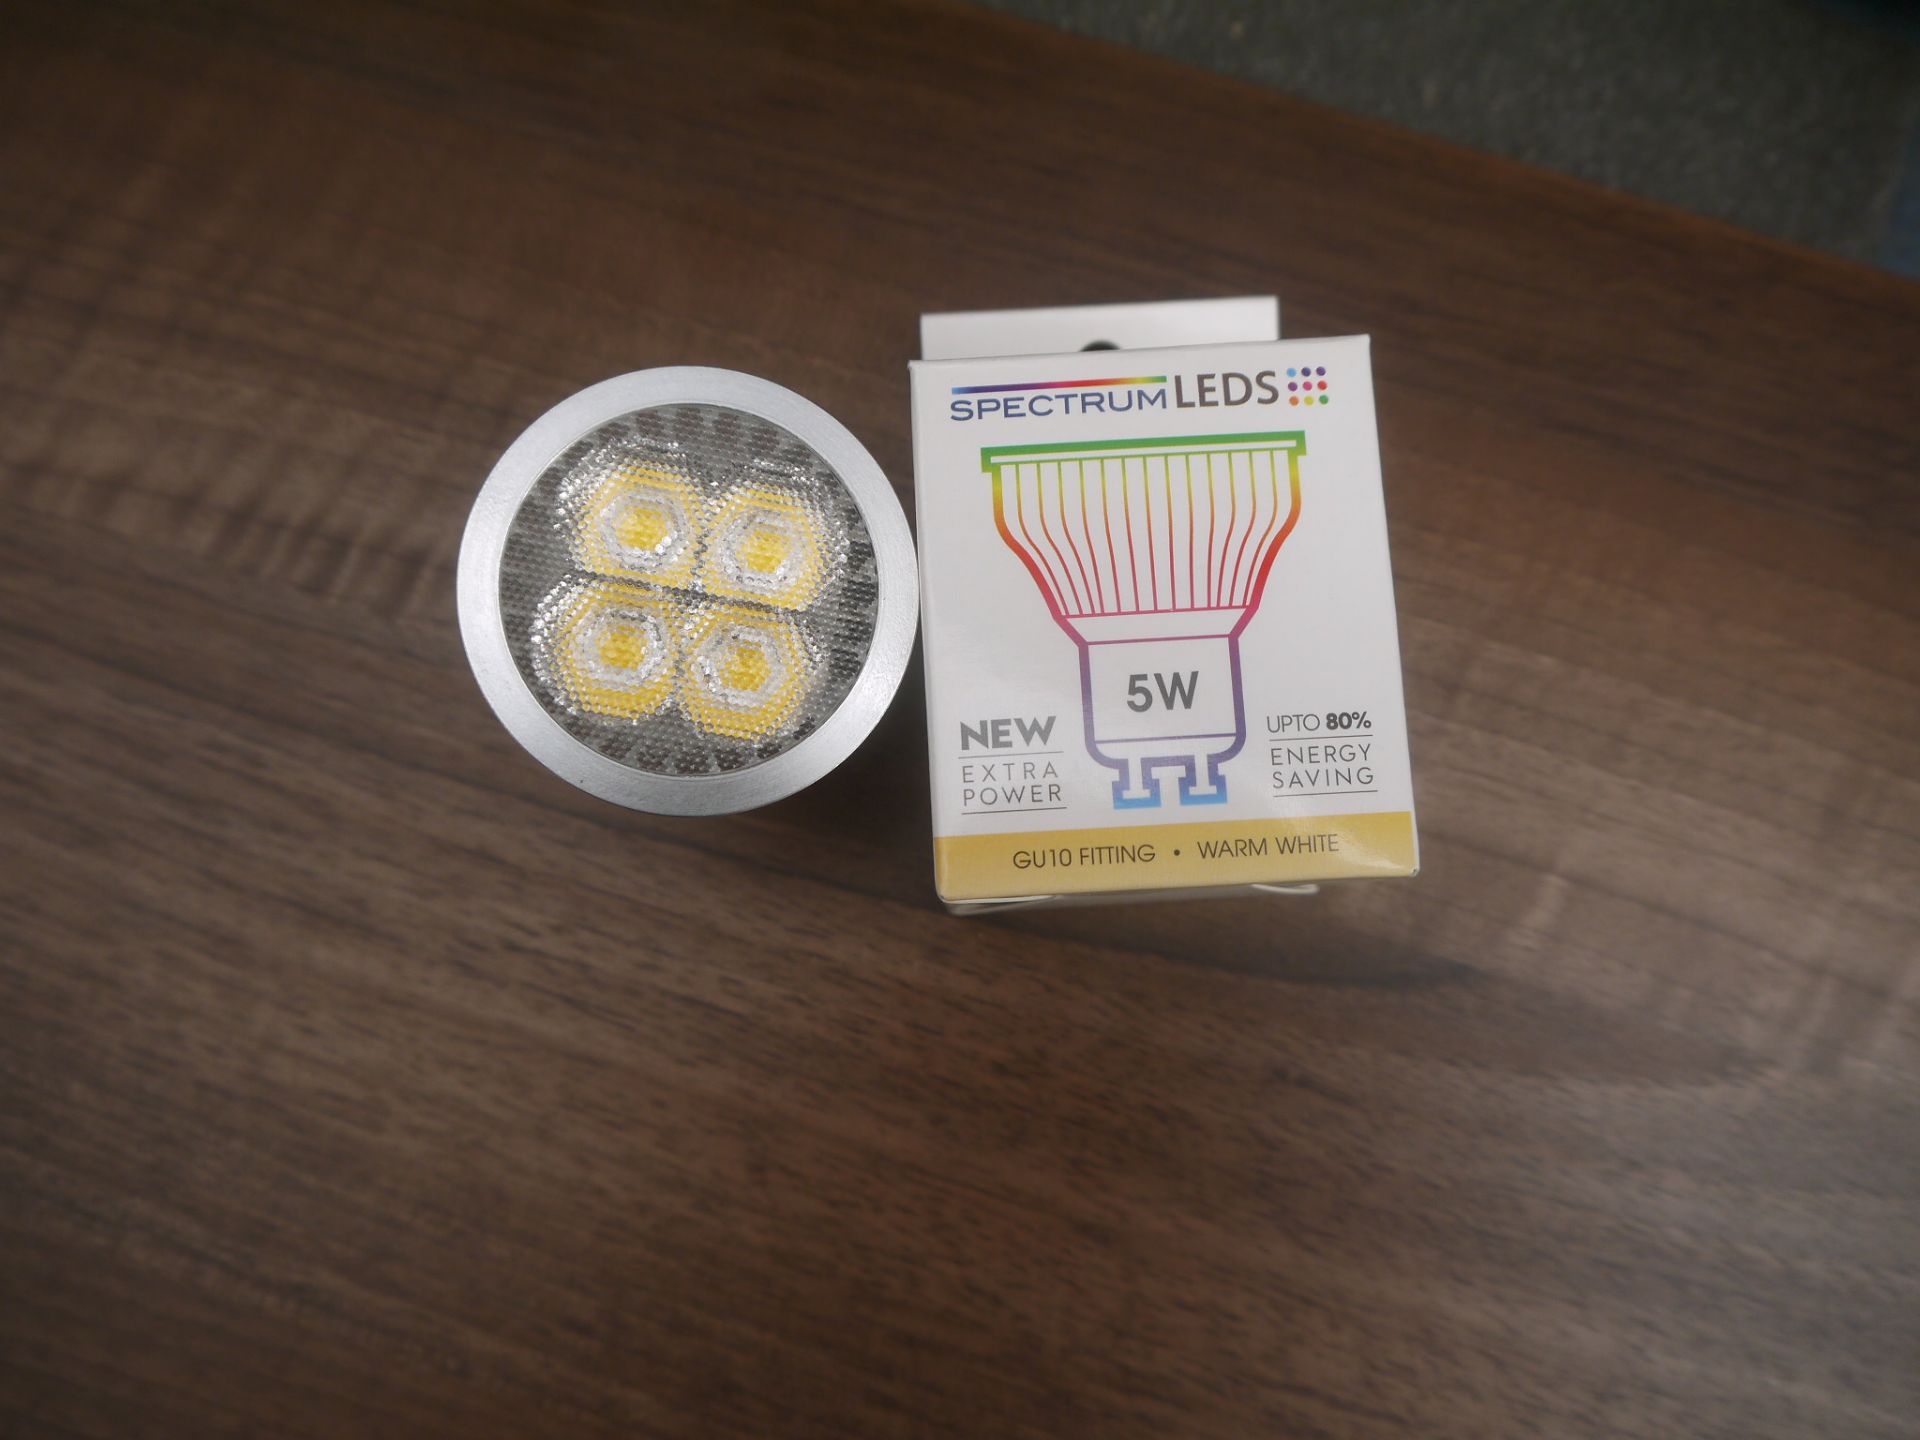 Spectrum LED's Warm white Down light bulbs, saves up to 80% more energy, RRP £12, new and boxed